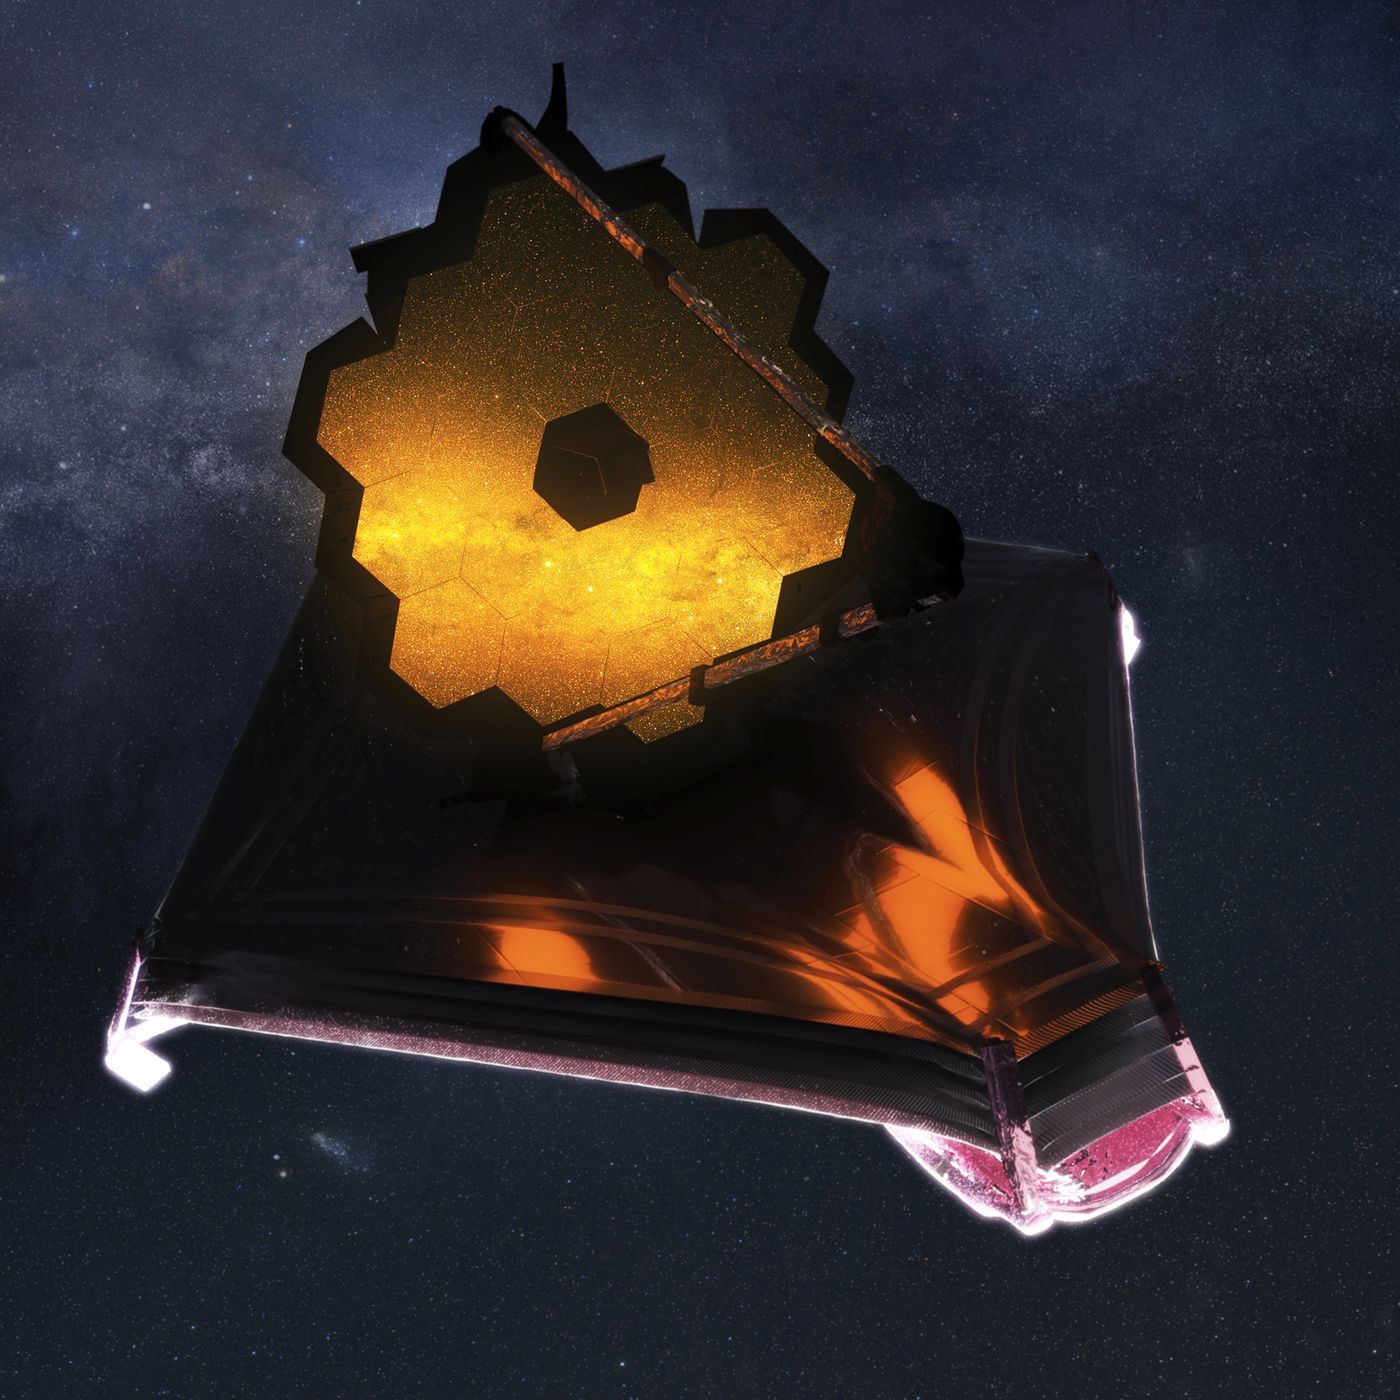 NASA published images from the James Webb Space Telescope 